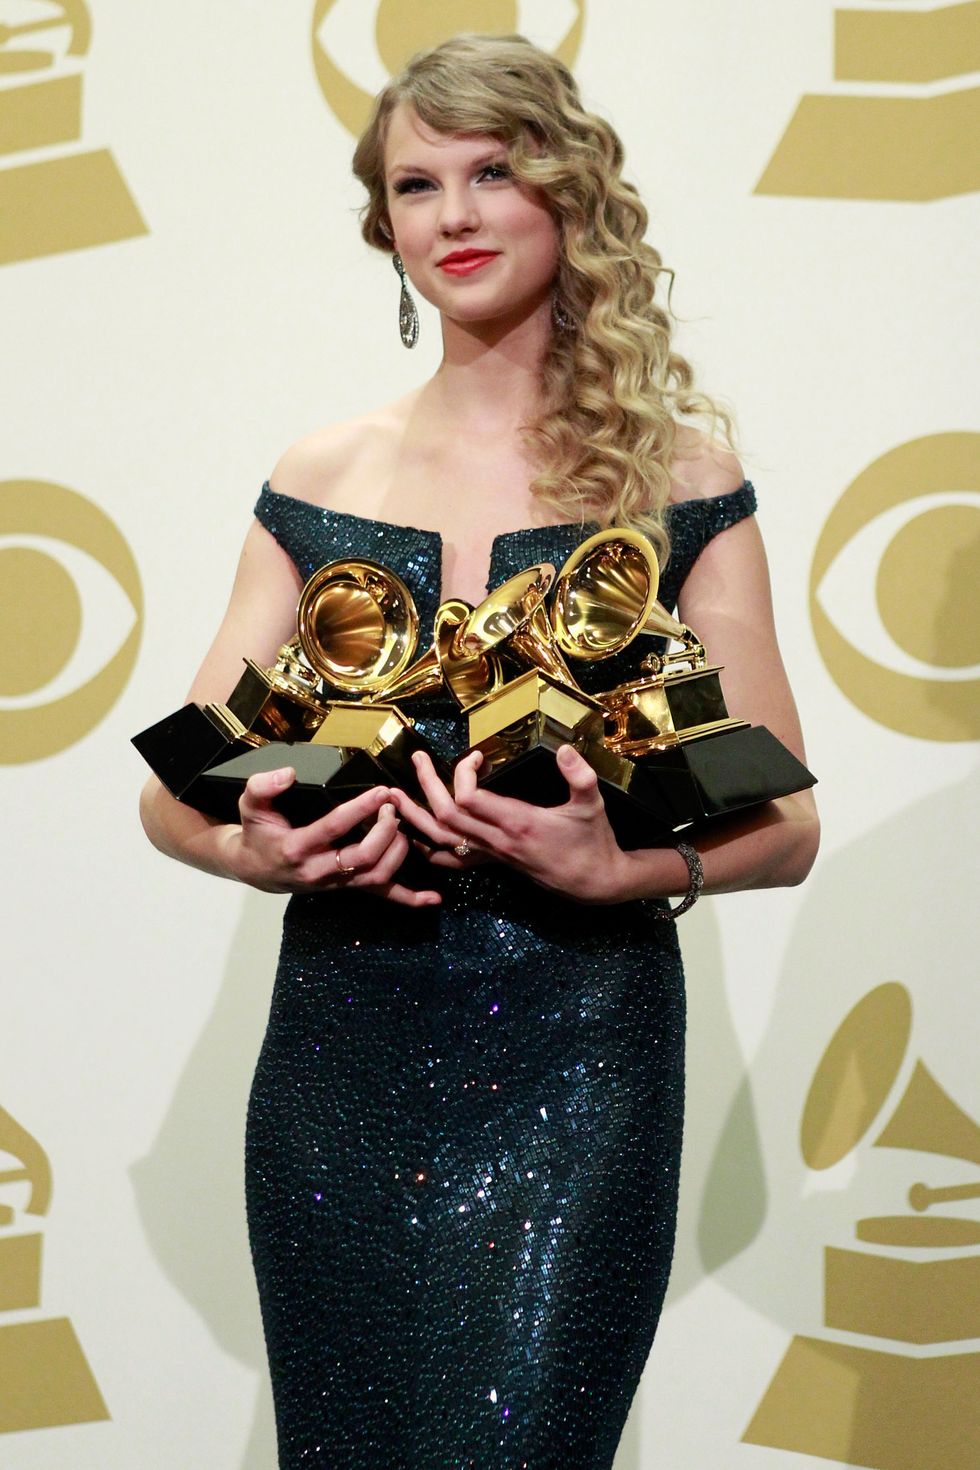 musician taylor swift poses in the press room at the 52nd annual grammy awards held at staples center on january 31, 2010 in los angeles, california photo by michael tranfilmmagic